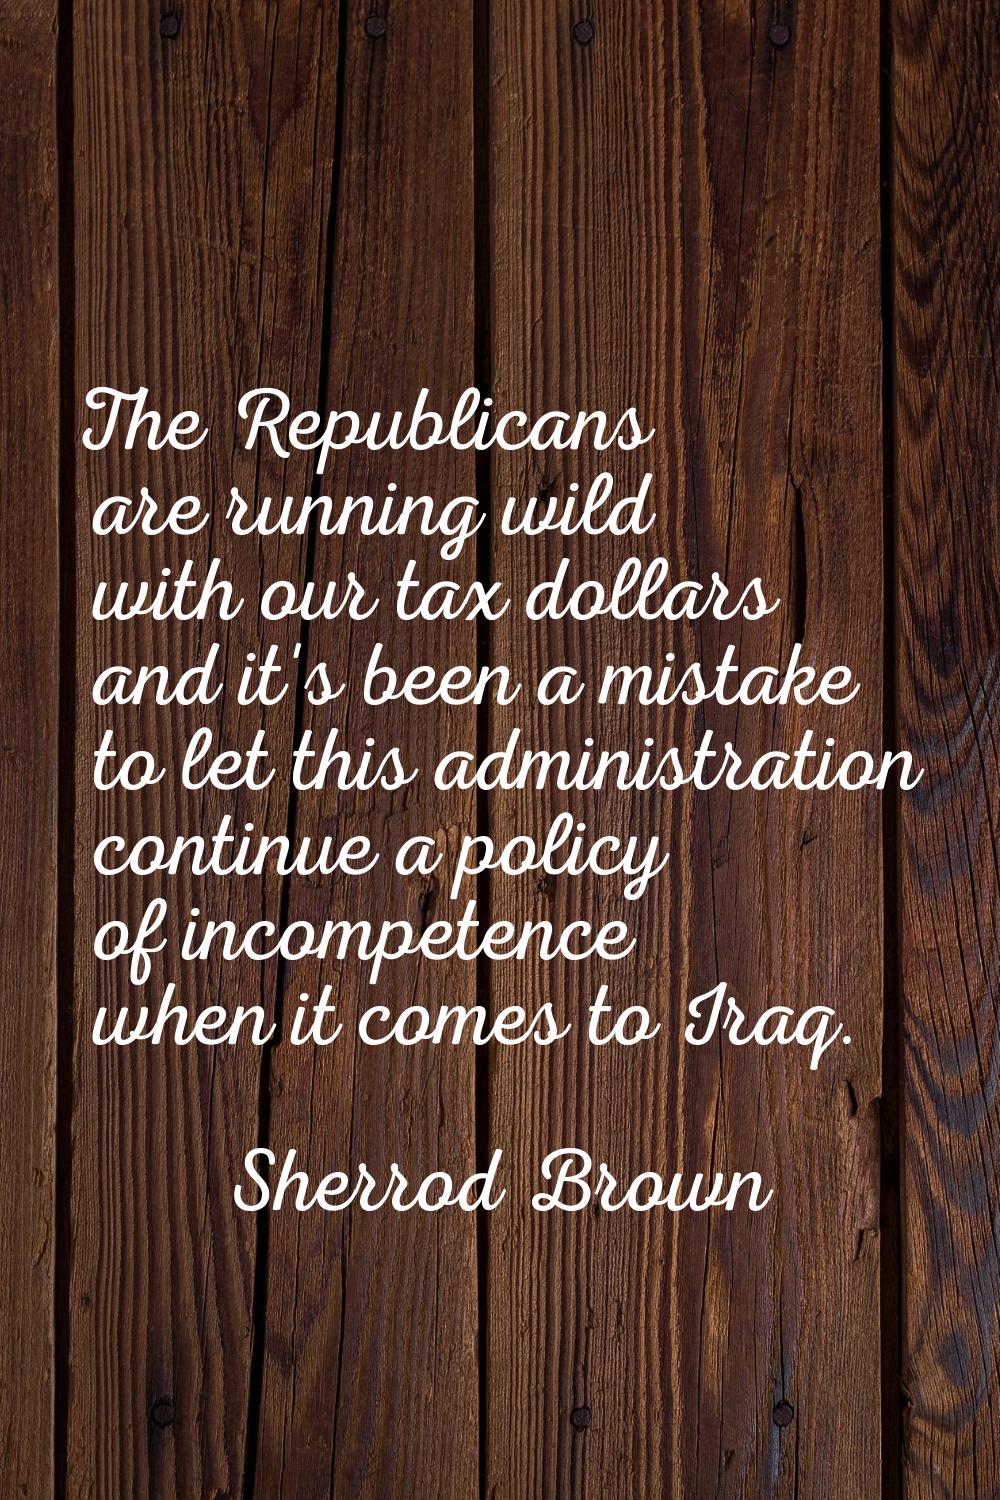 The Republicans are running wild with our tax dollars and it's been a mistake to let this administr